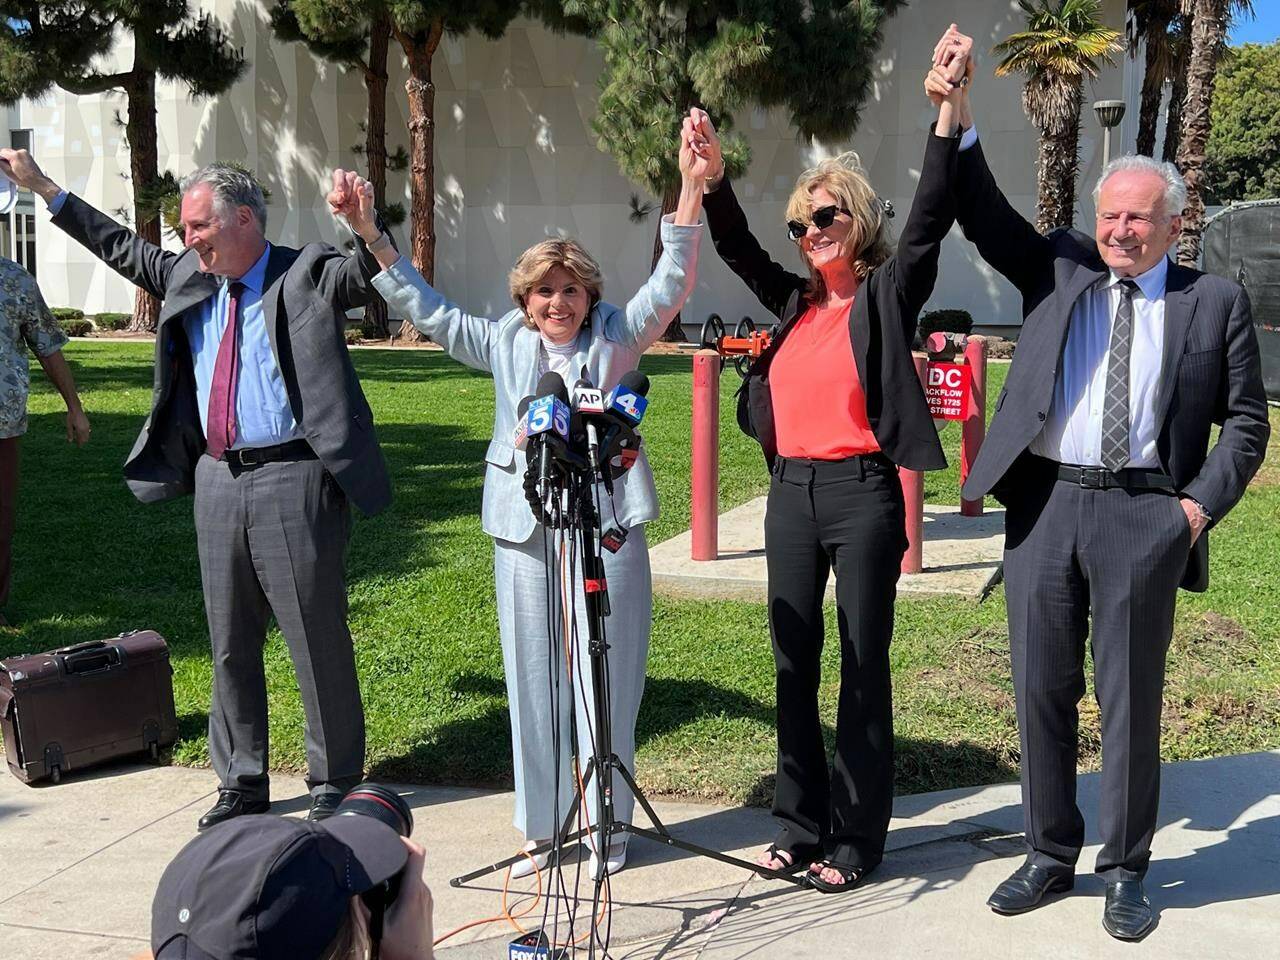 Attorneys John West, from left, Gloria Allred, plaintiff Judy Huth and attorney Nathan Goldberg join arms following a verdict in Huth’s favour in a civil trial involving actor Bill Cosby outside the Santa Monica Courthouse on Tuesday, March 21, 2022. Jurors found that Cosby sexually abused then 16-year-old Huth at the Playboy Mansion in 1975. (AP Photo/Richard Taber)